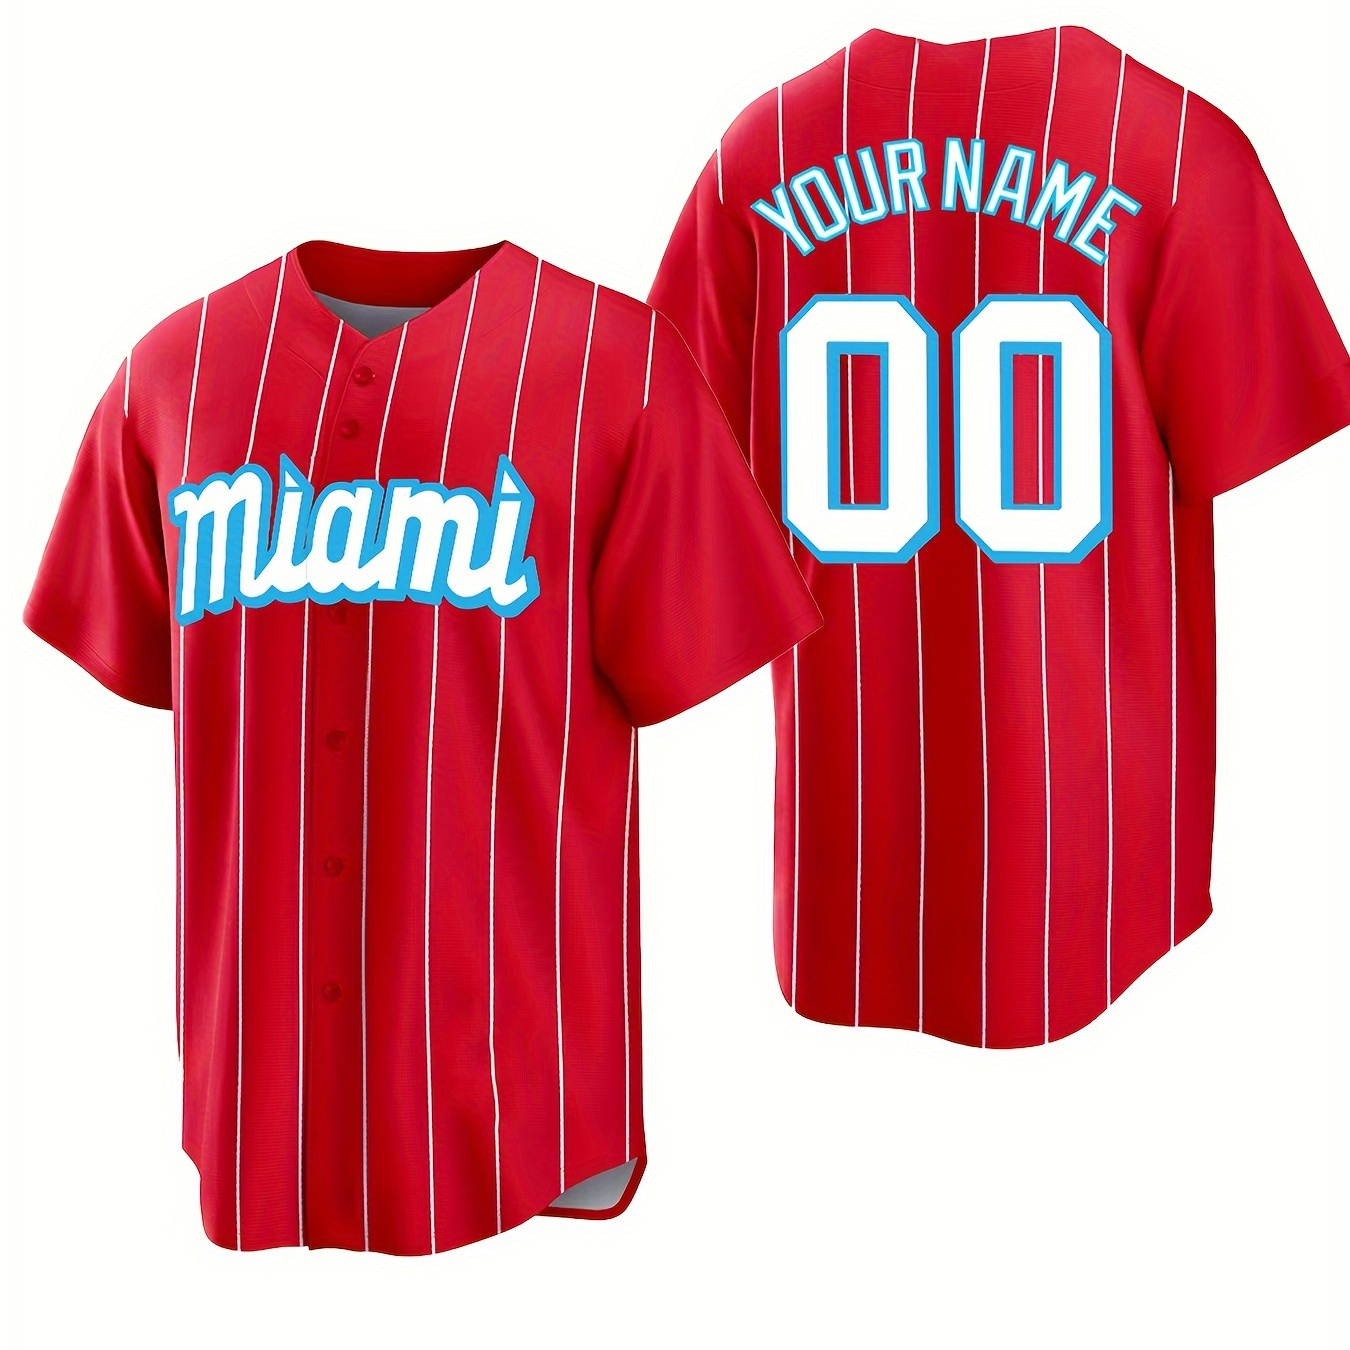 

Men's Personalized Custom Baseball Jersey Shirt, Your Diy Name Numbers & Miami Graphic Print Short Sleeve Button Up Shirt For Competition Party Training